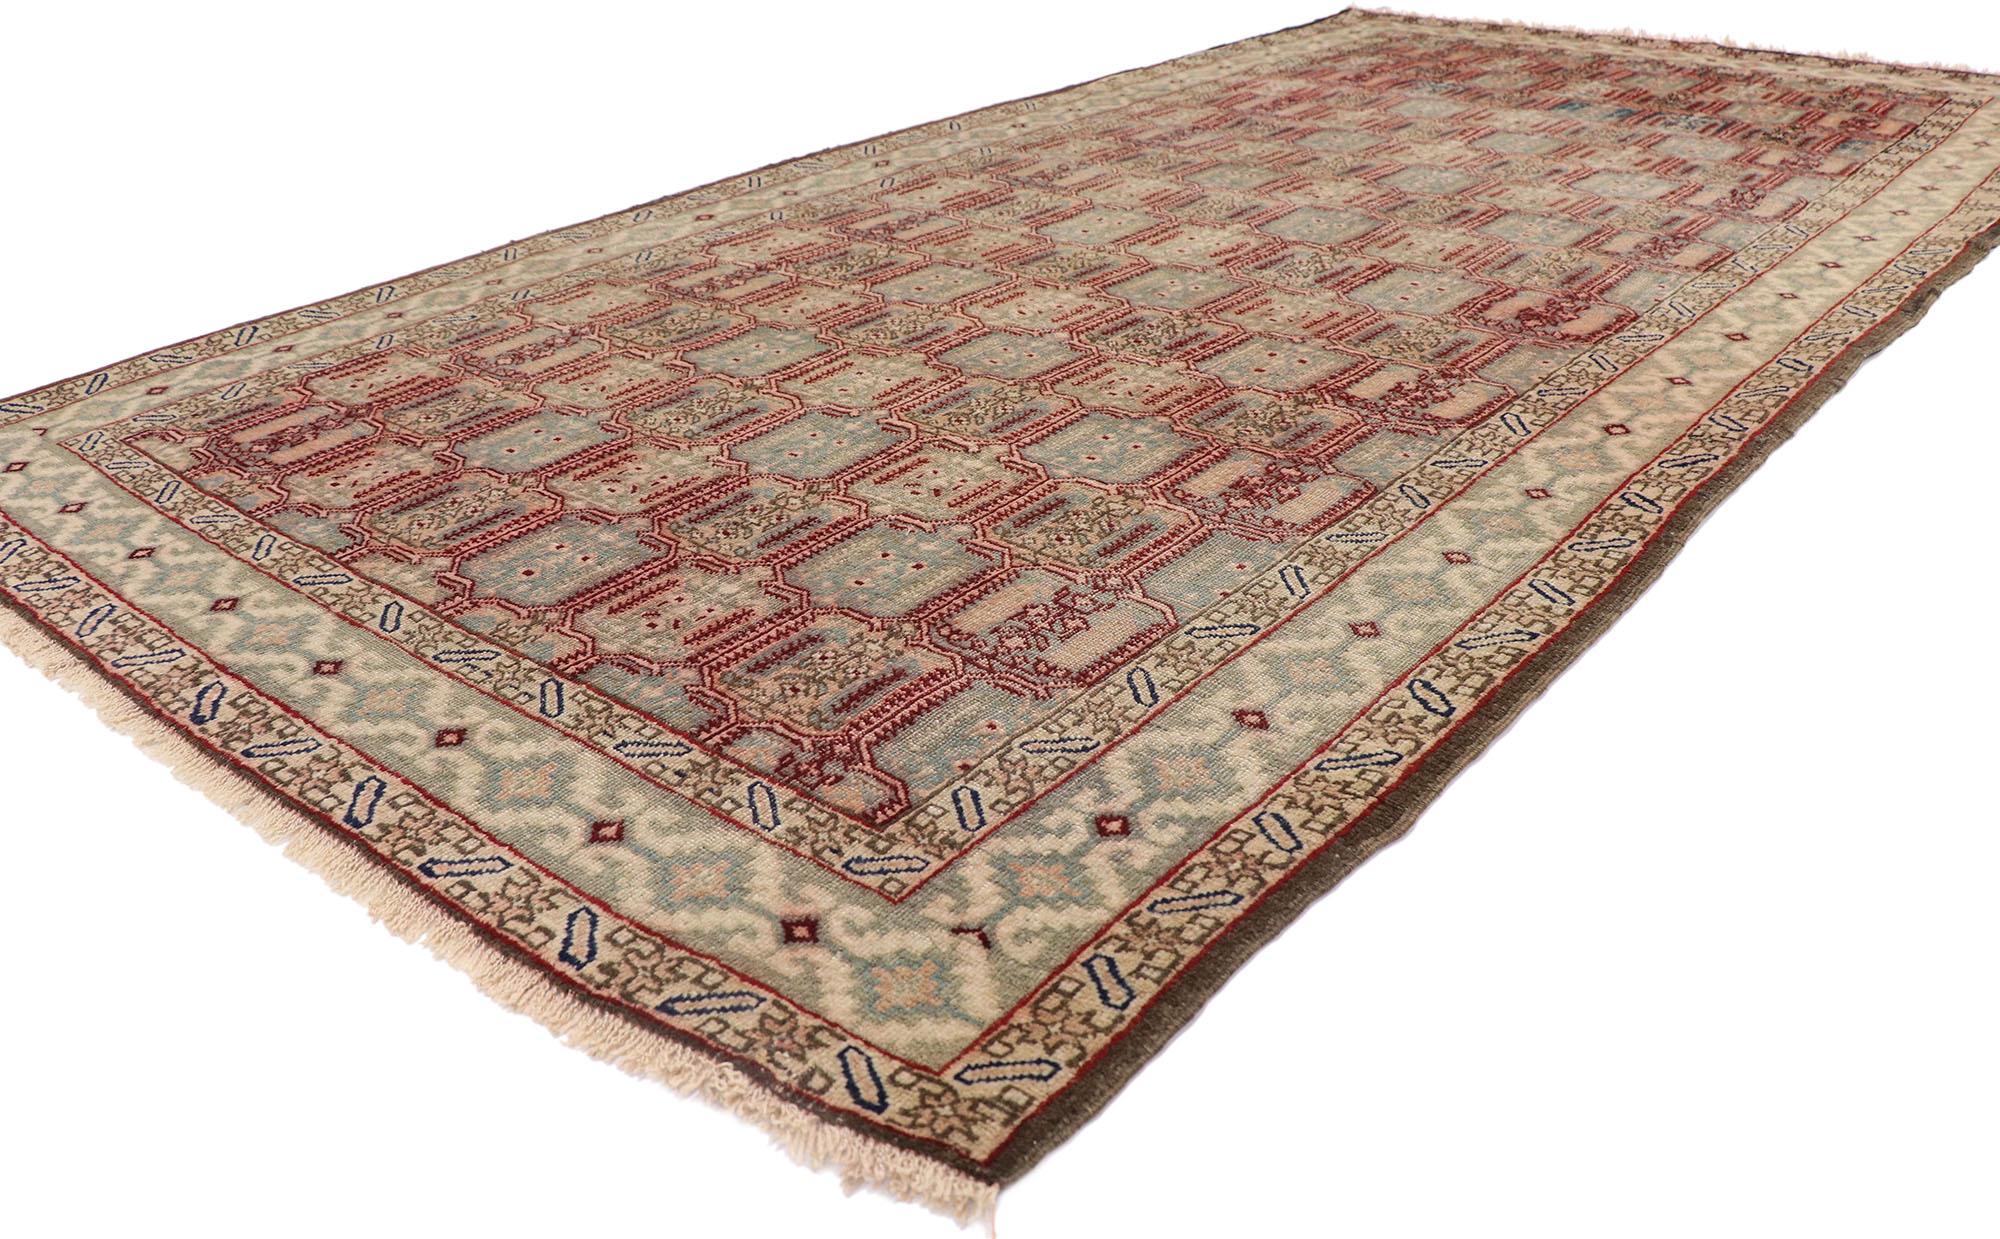 60947 Distressed Antique Persian Azerbaijan Gallery rug 4'10 x 09'08. With its time-softened colors and rugged beauty, this hand-knotted wool distressed antique Azerbaijan gallery rug is a captivating vision of woven beauty. The abrashed field